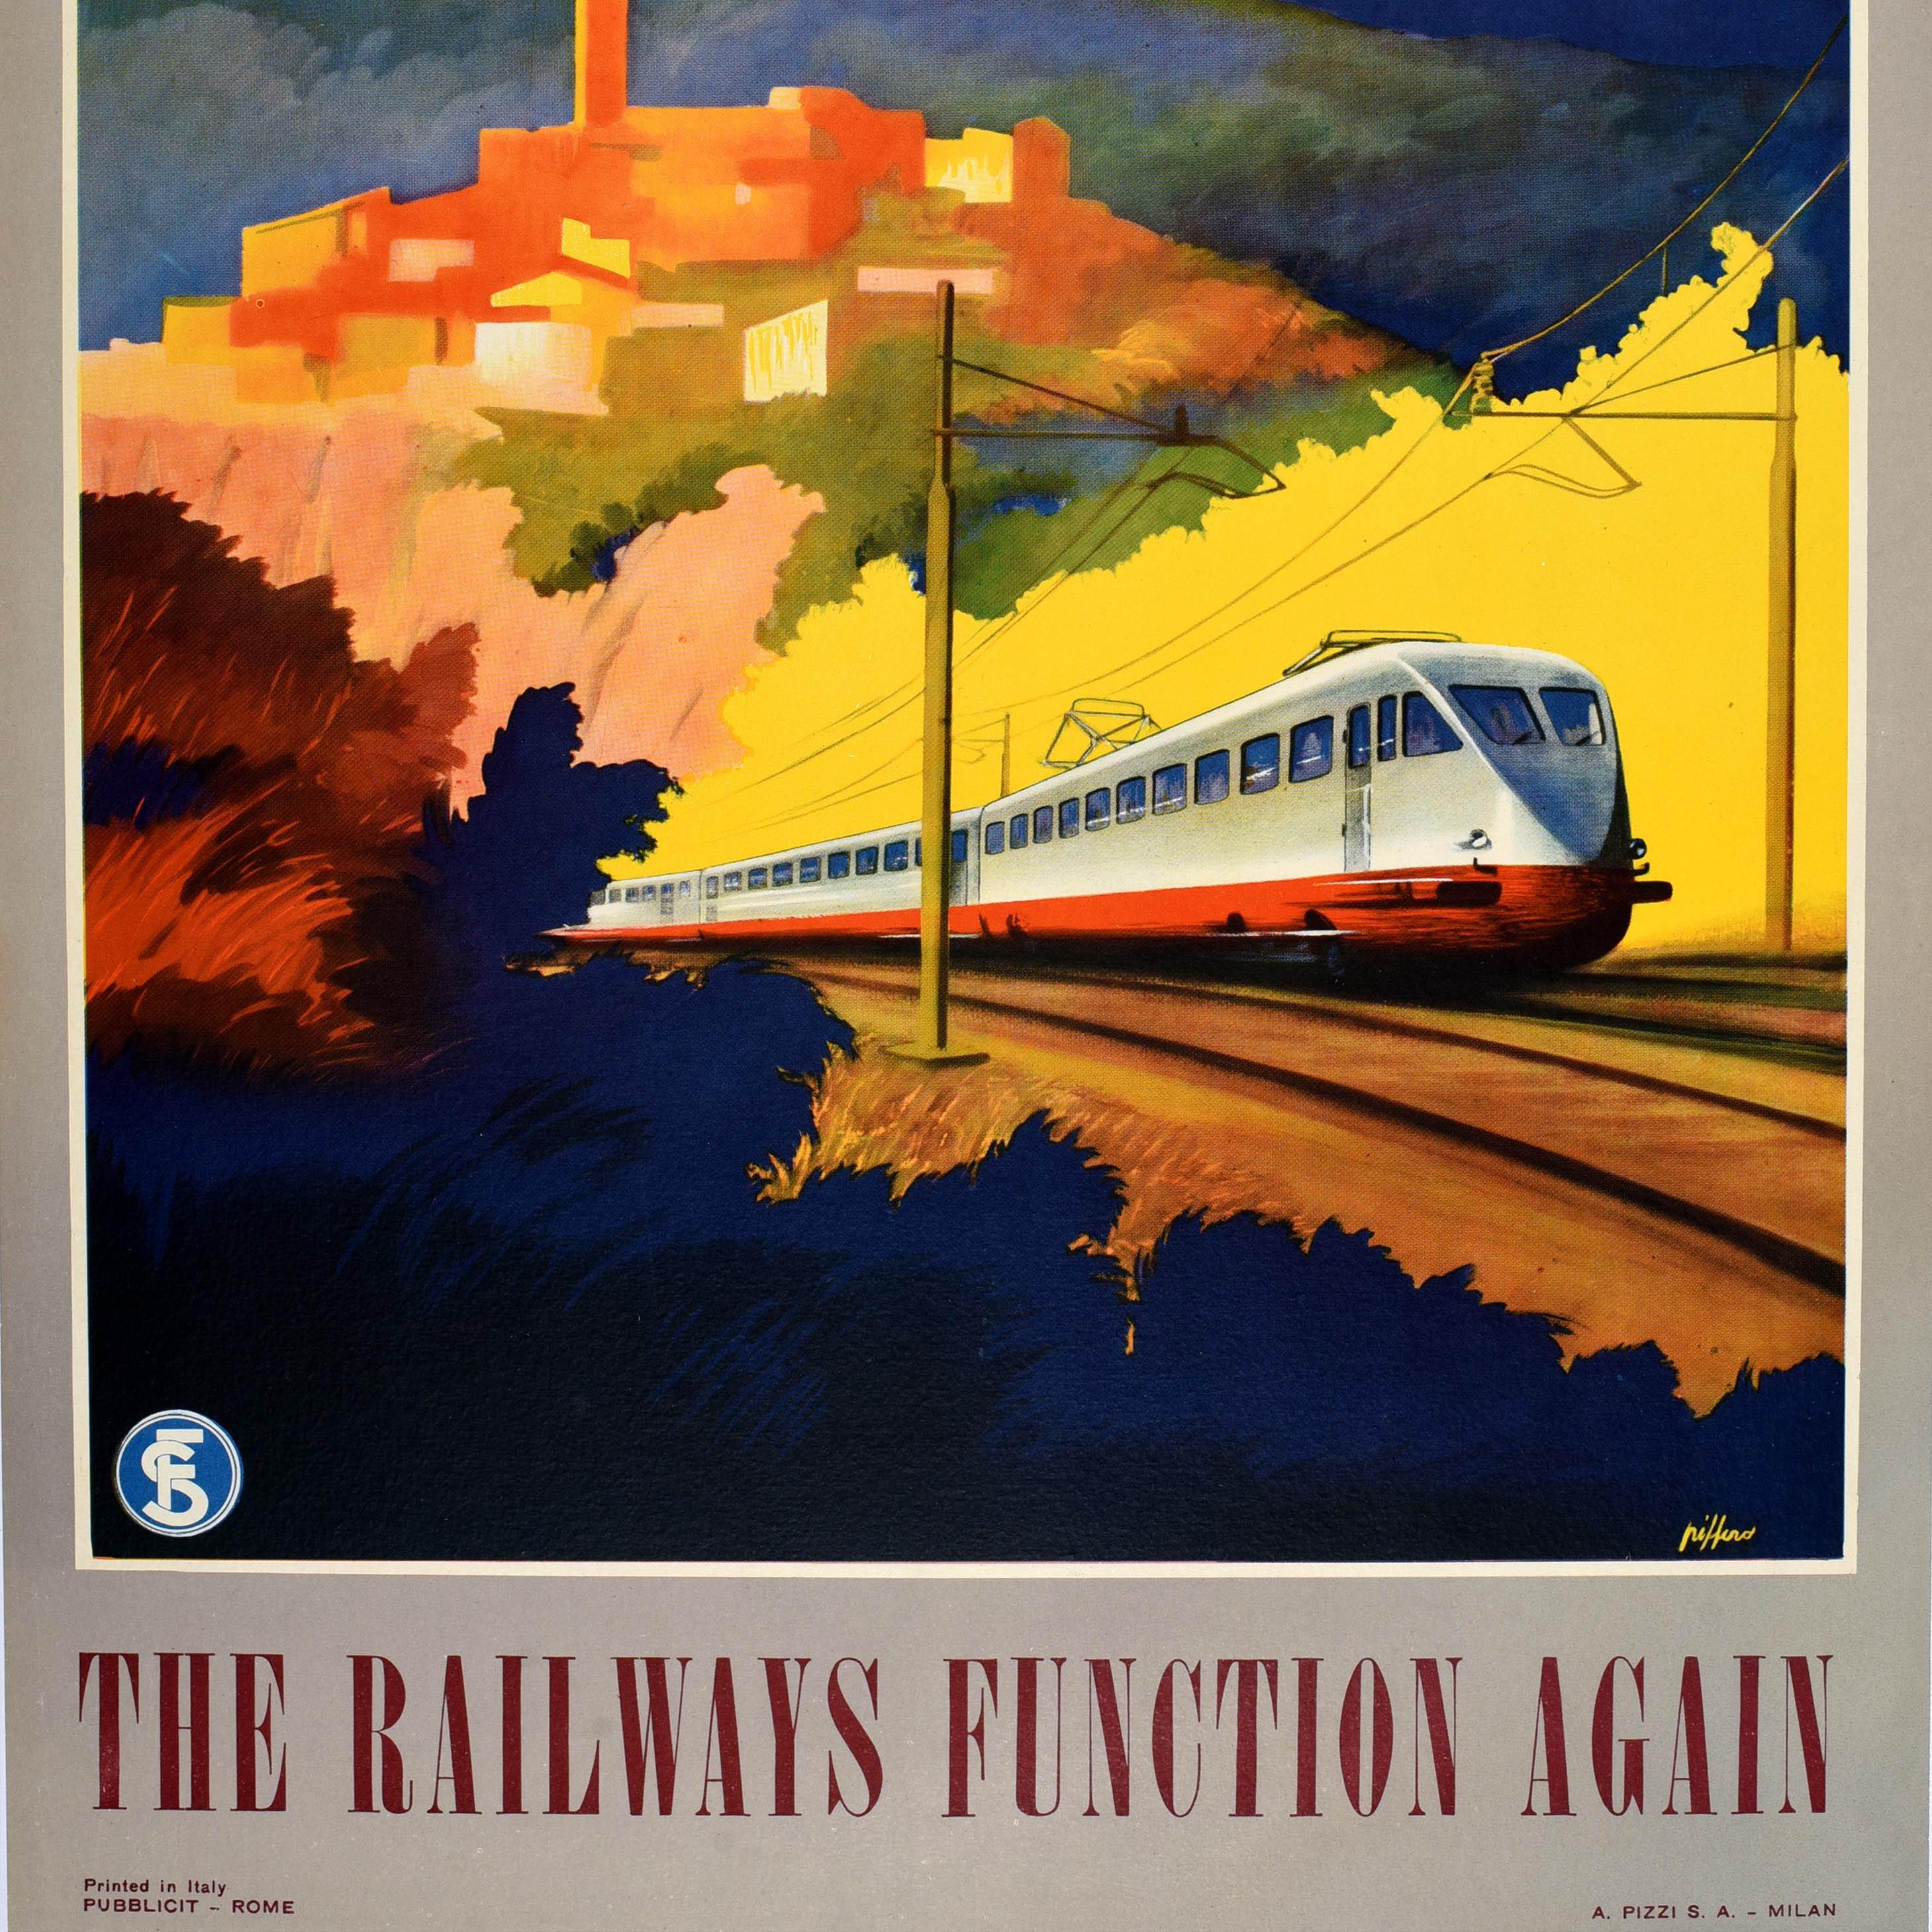 Mid-20th Century Original Vintage Train Poster Travel Italy Italian State Railways Function Again For Sale